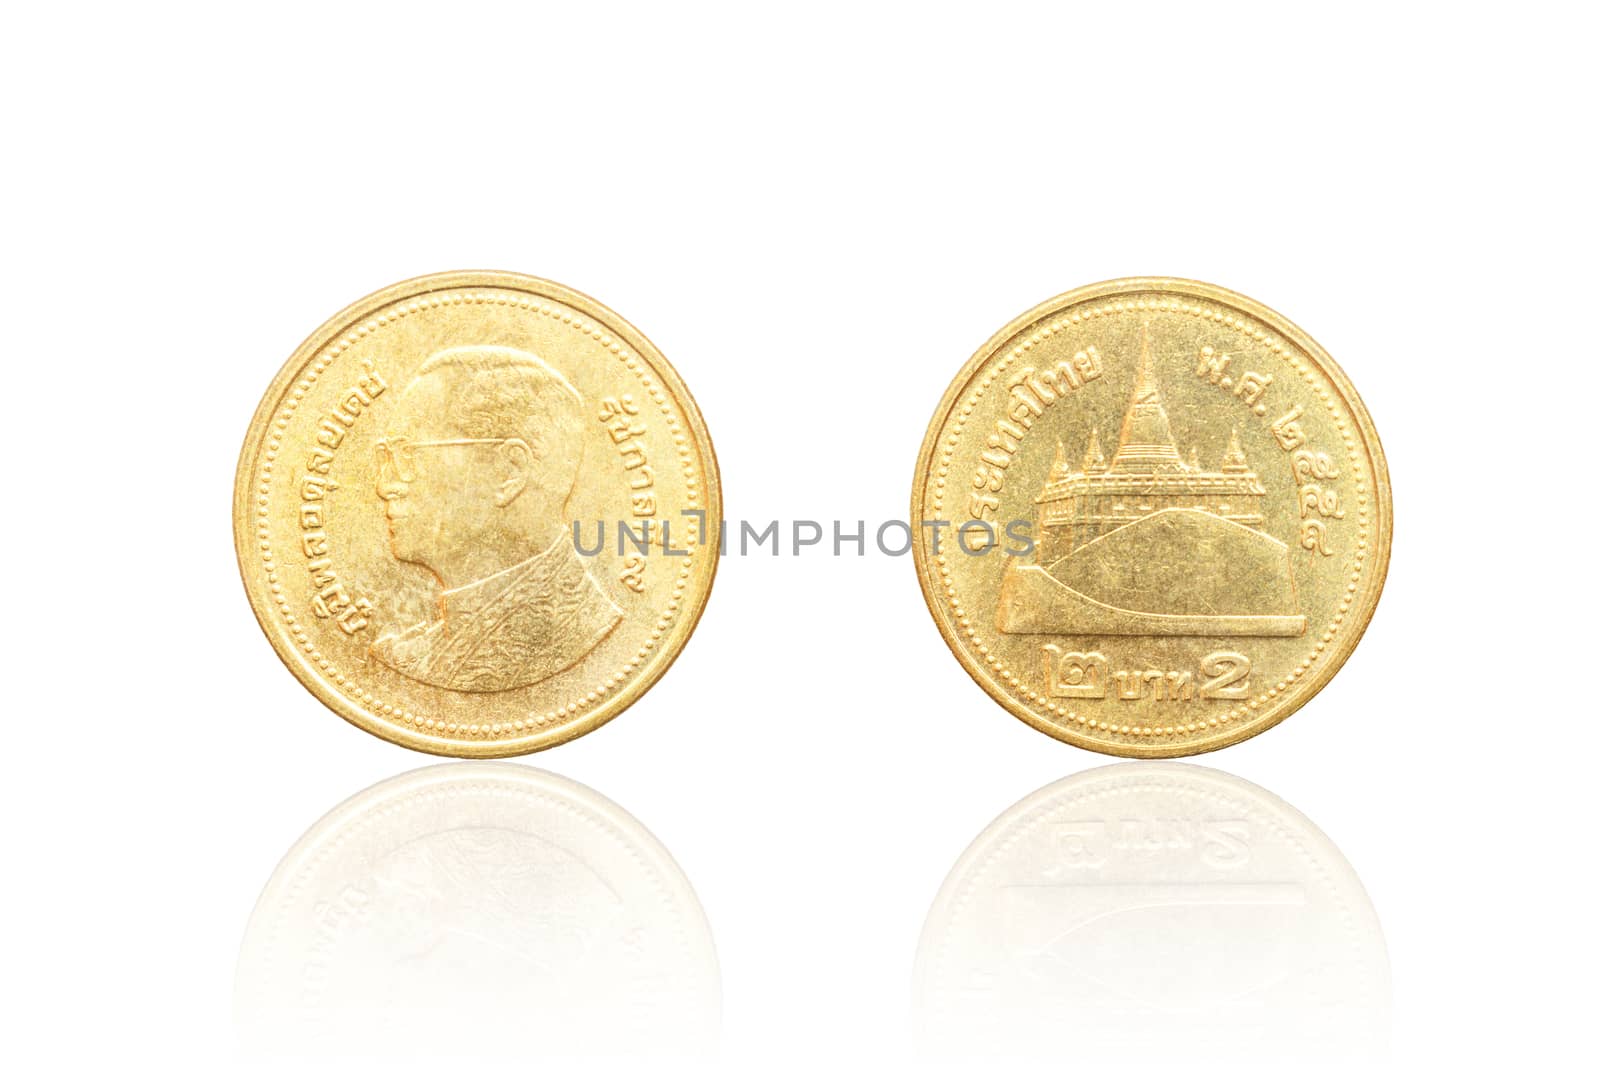 Thai coin 2 baht and reflect. by stigmatize